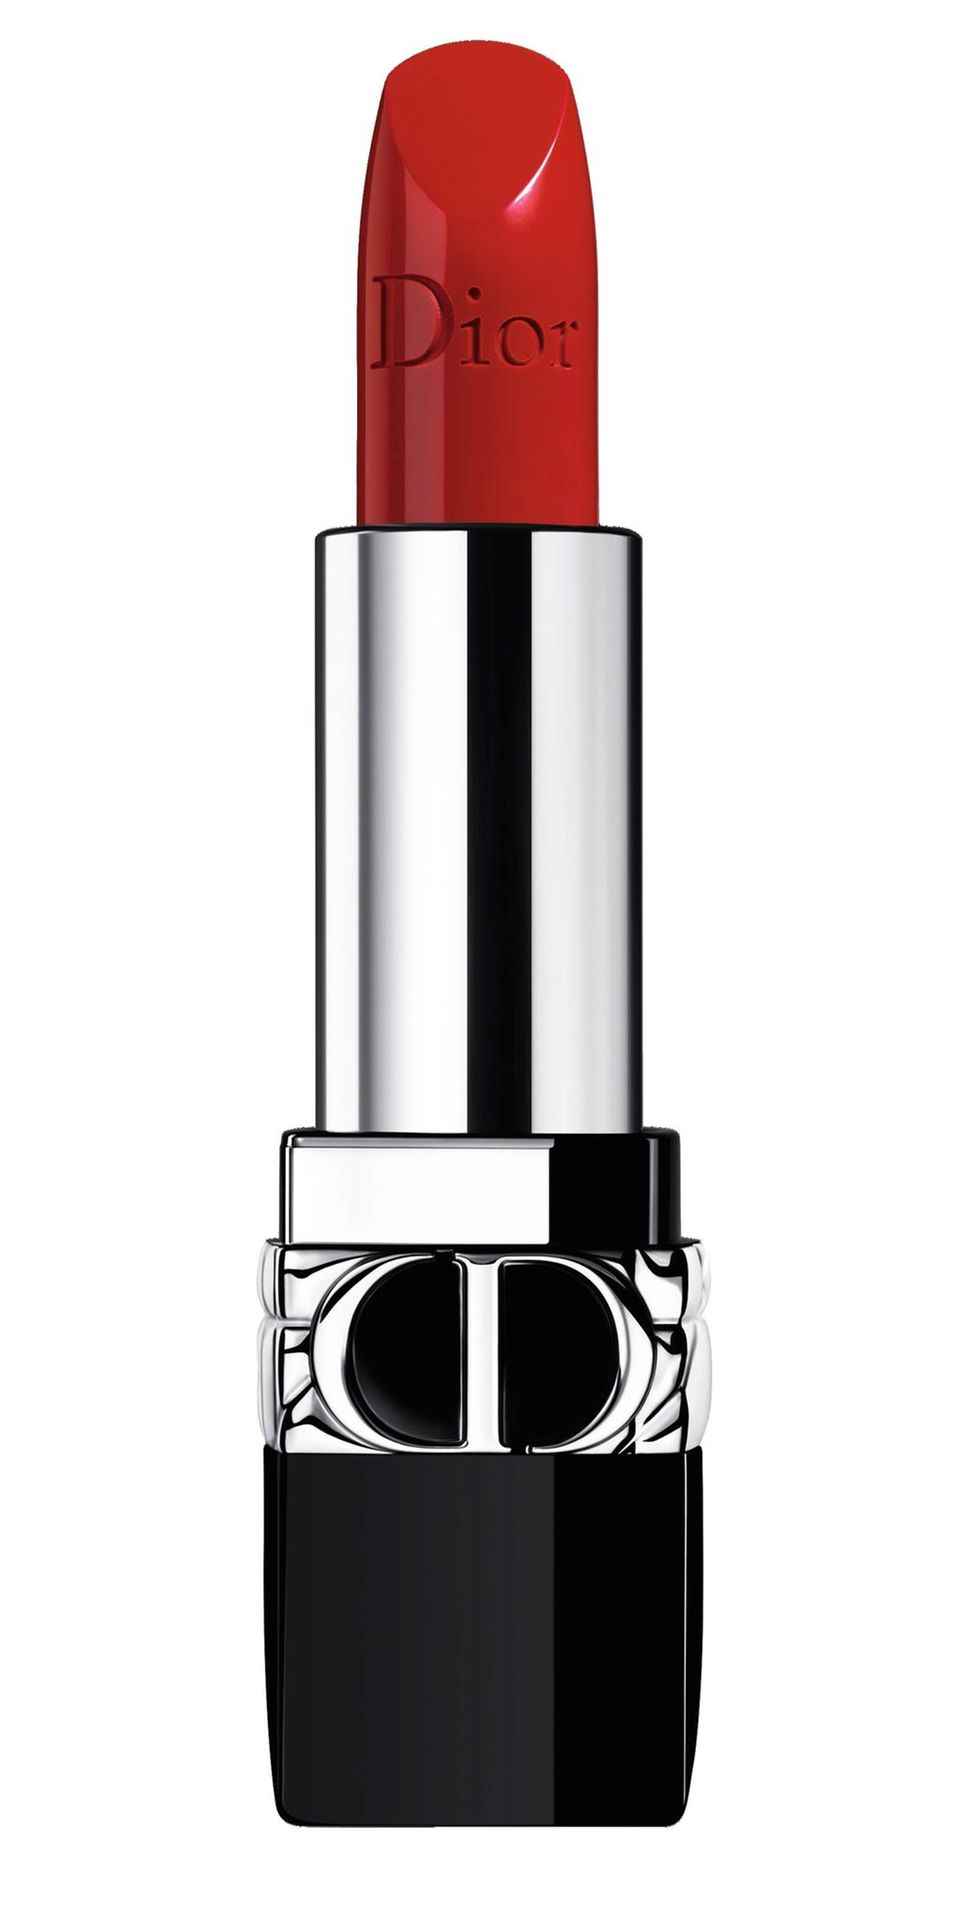 Find your own style: red lipstick